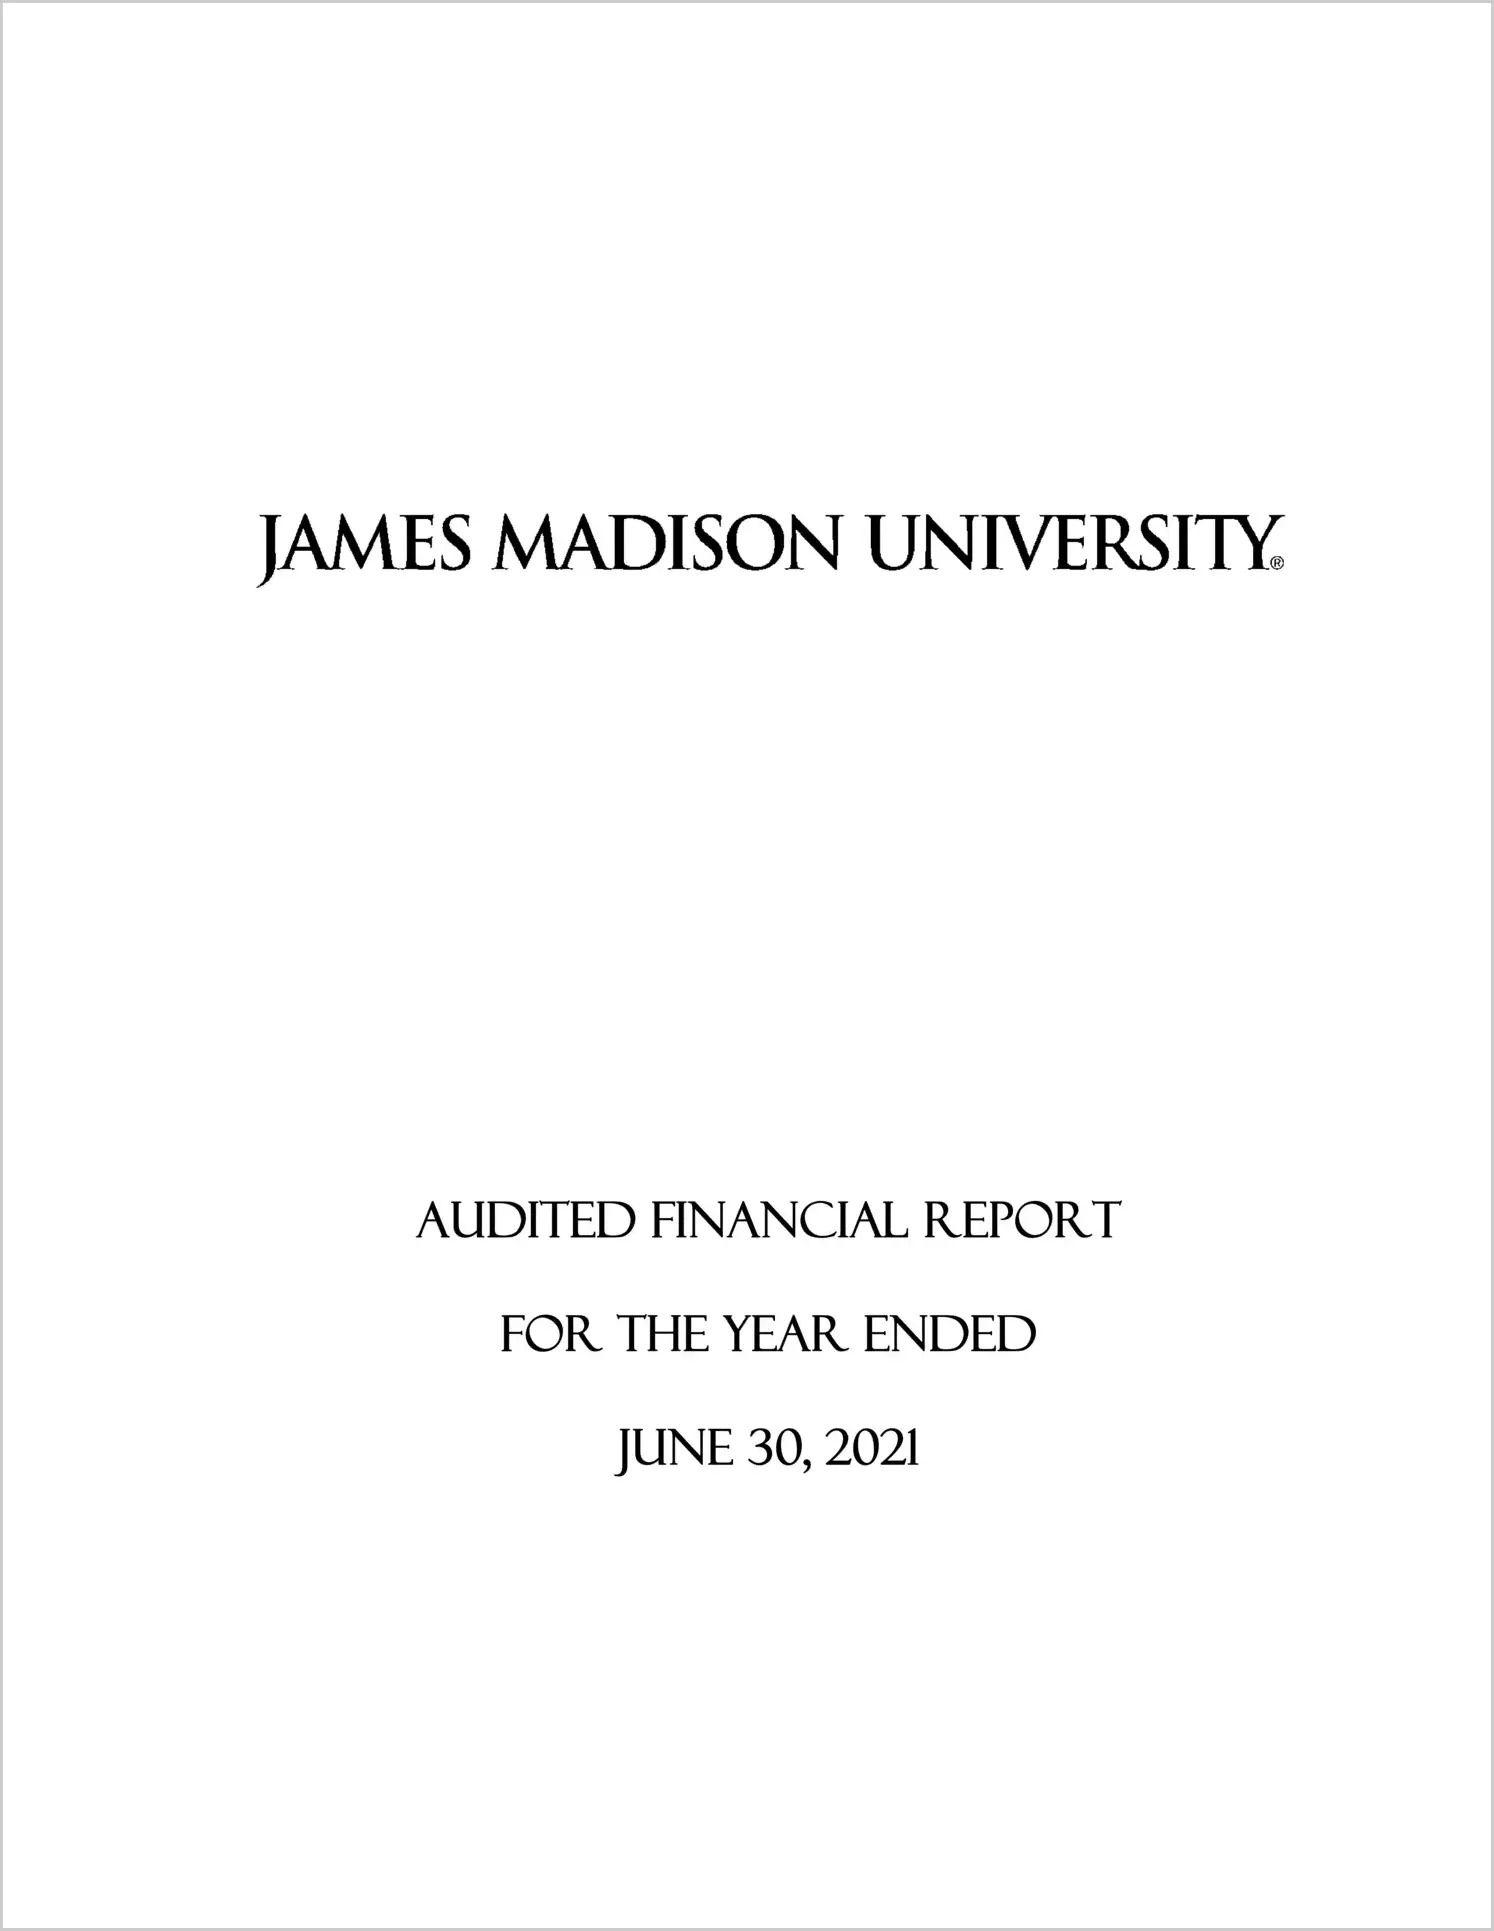 James Madison University Financial Statements for the year ended June 30, 2021